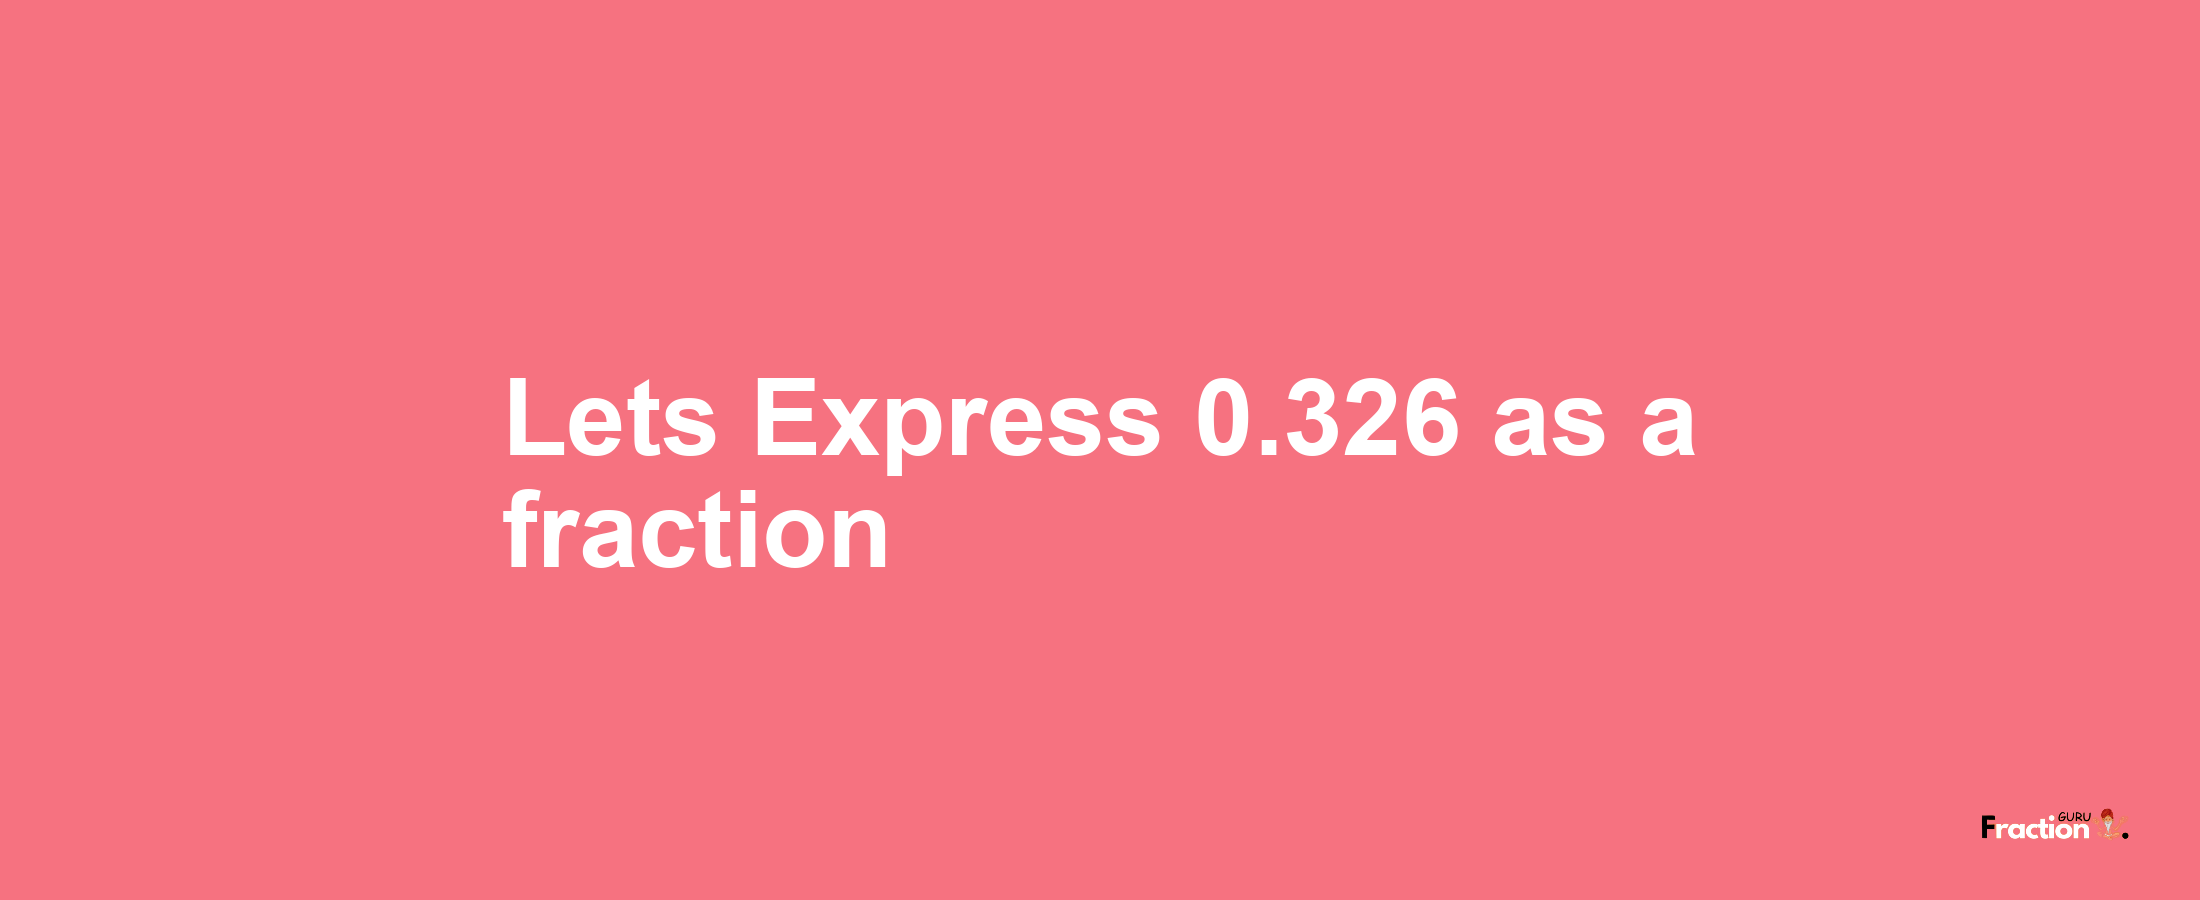 Lets Express 0.326 as afraction